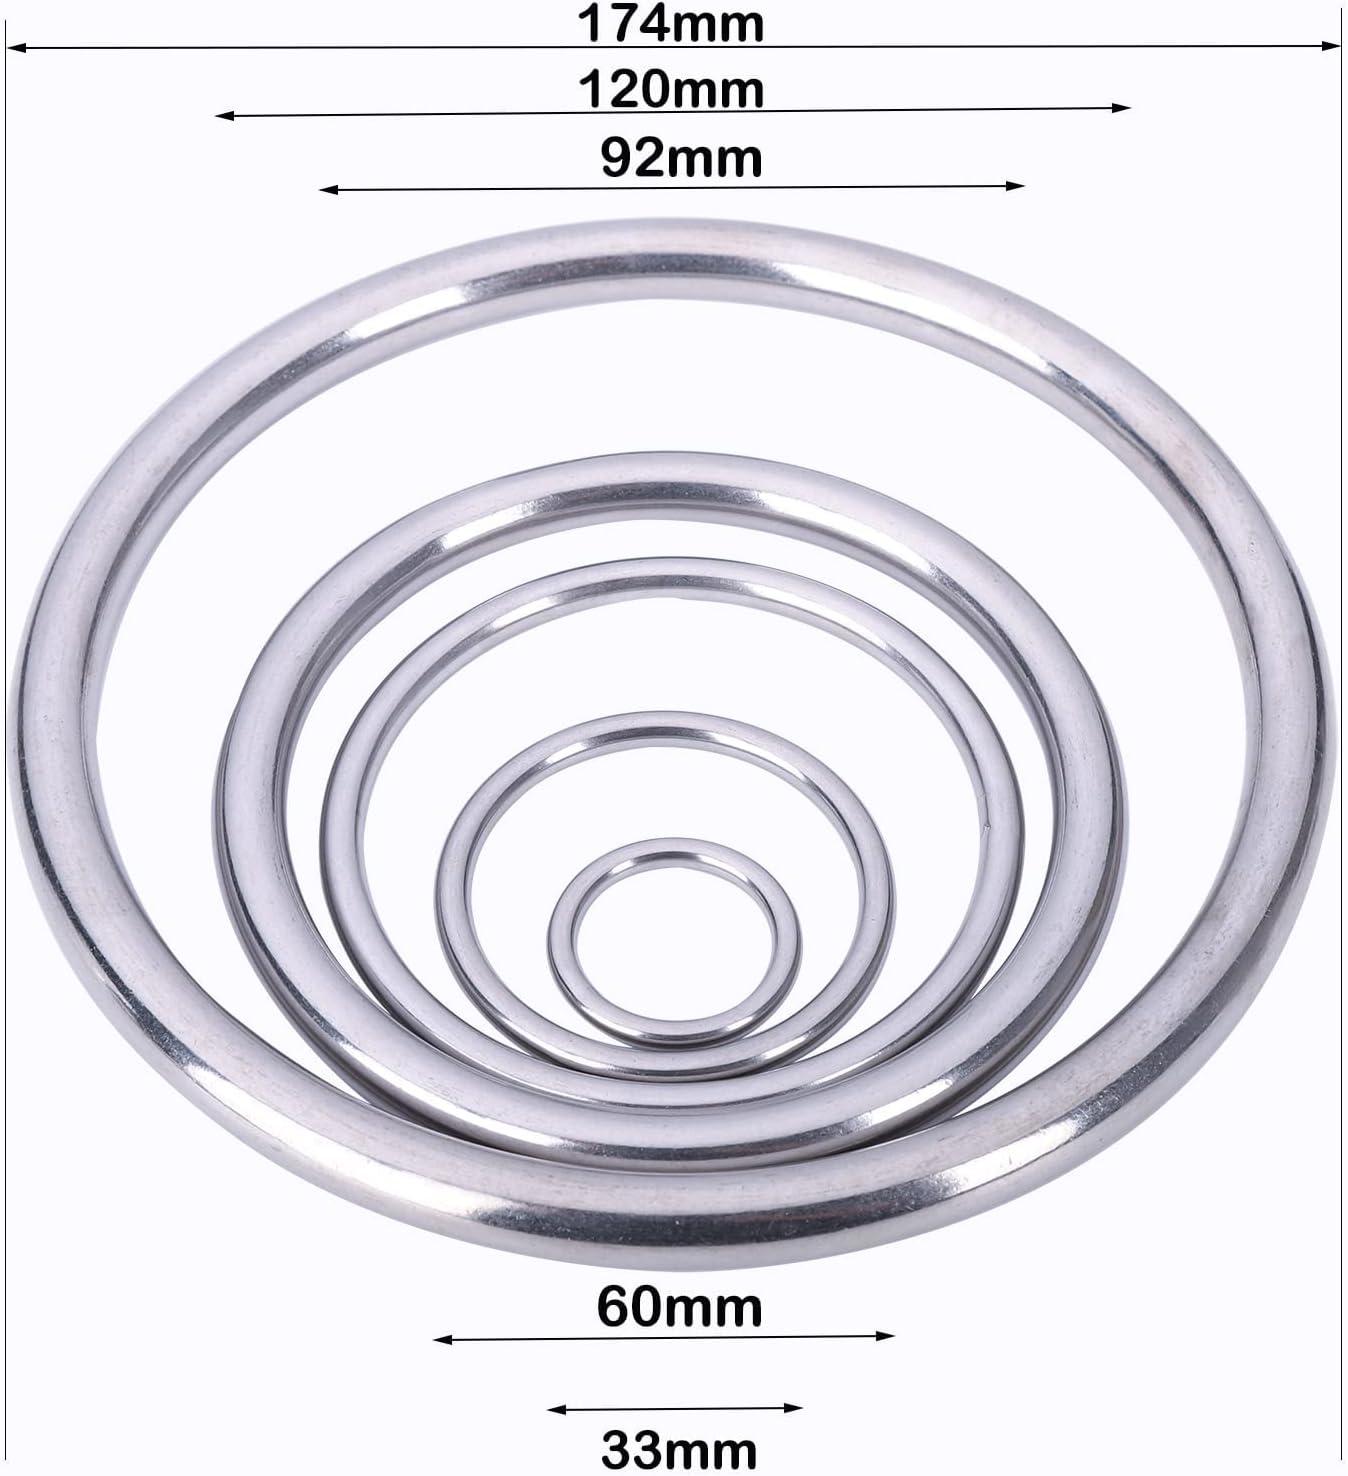 12 Pcs Metal O Rings 1 Inch Heavy Duty 304 Stainless Steel Welded O Ring  Multi-Purpose O-Ring for Macrame, DIY Crafts, Hardware, Bags, Camping Belt,  Dog Leashes, Keychain, Purse. 4mm*25mm ID 12Pcs